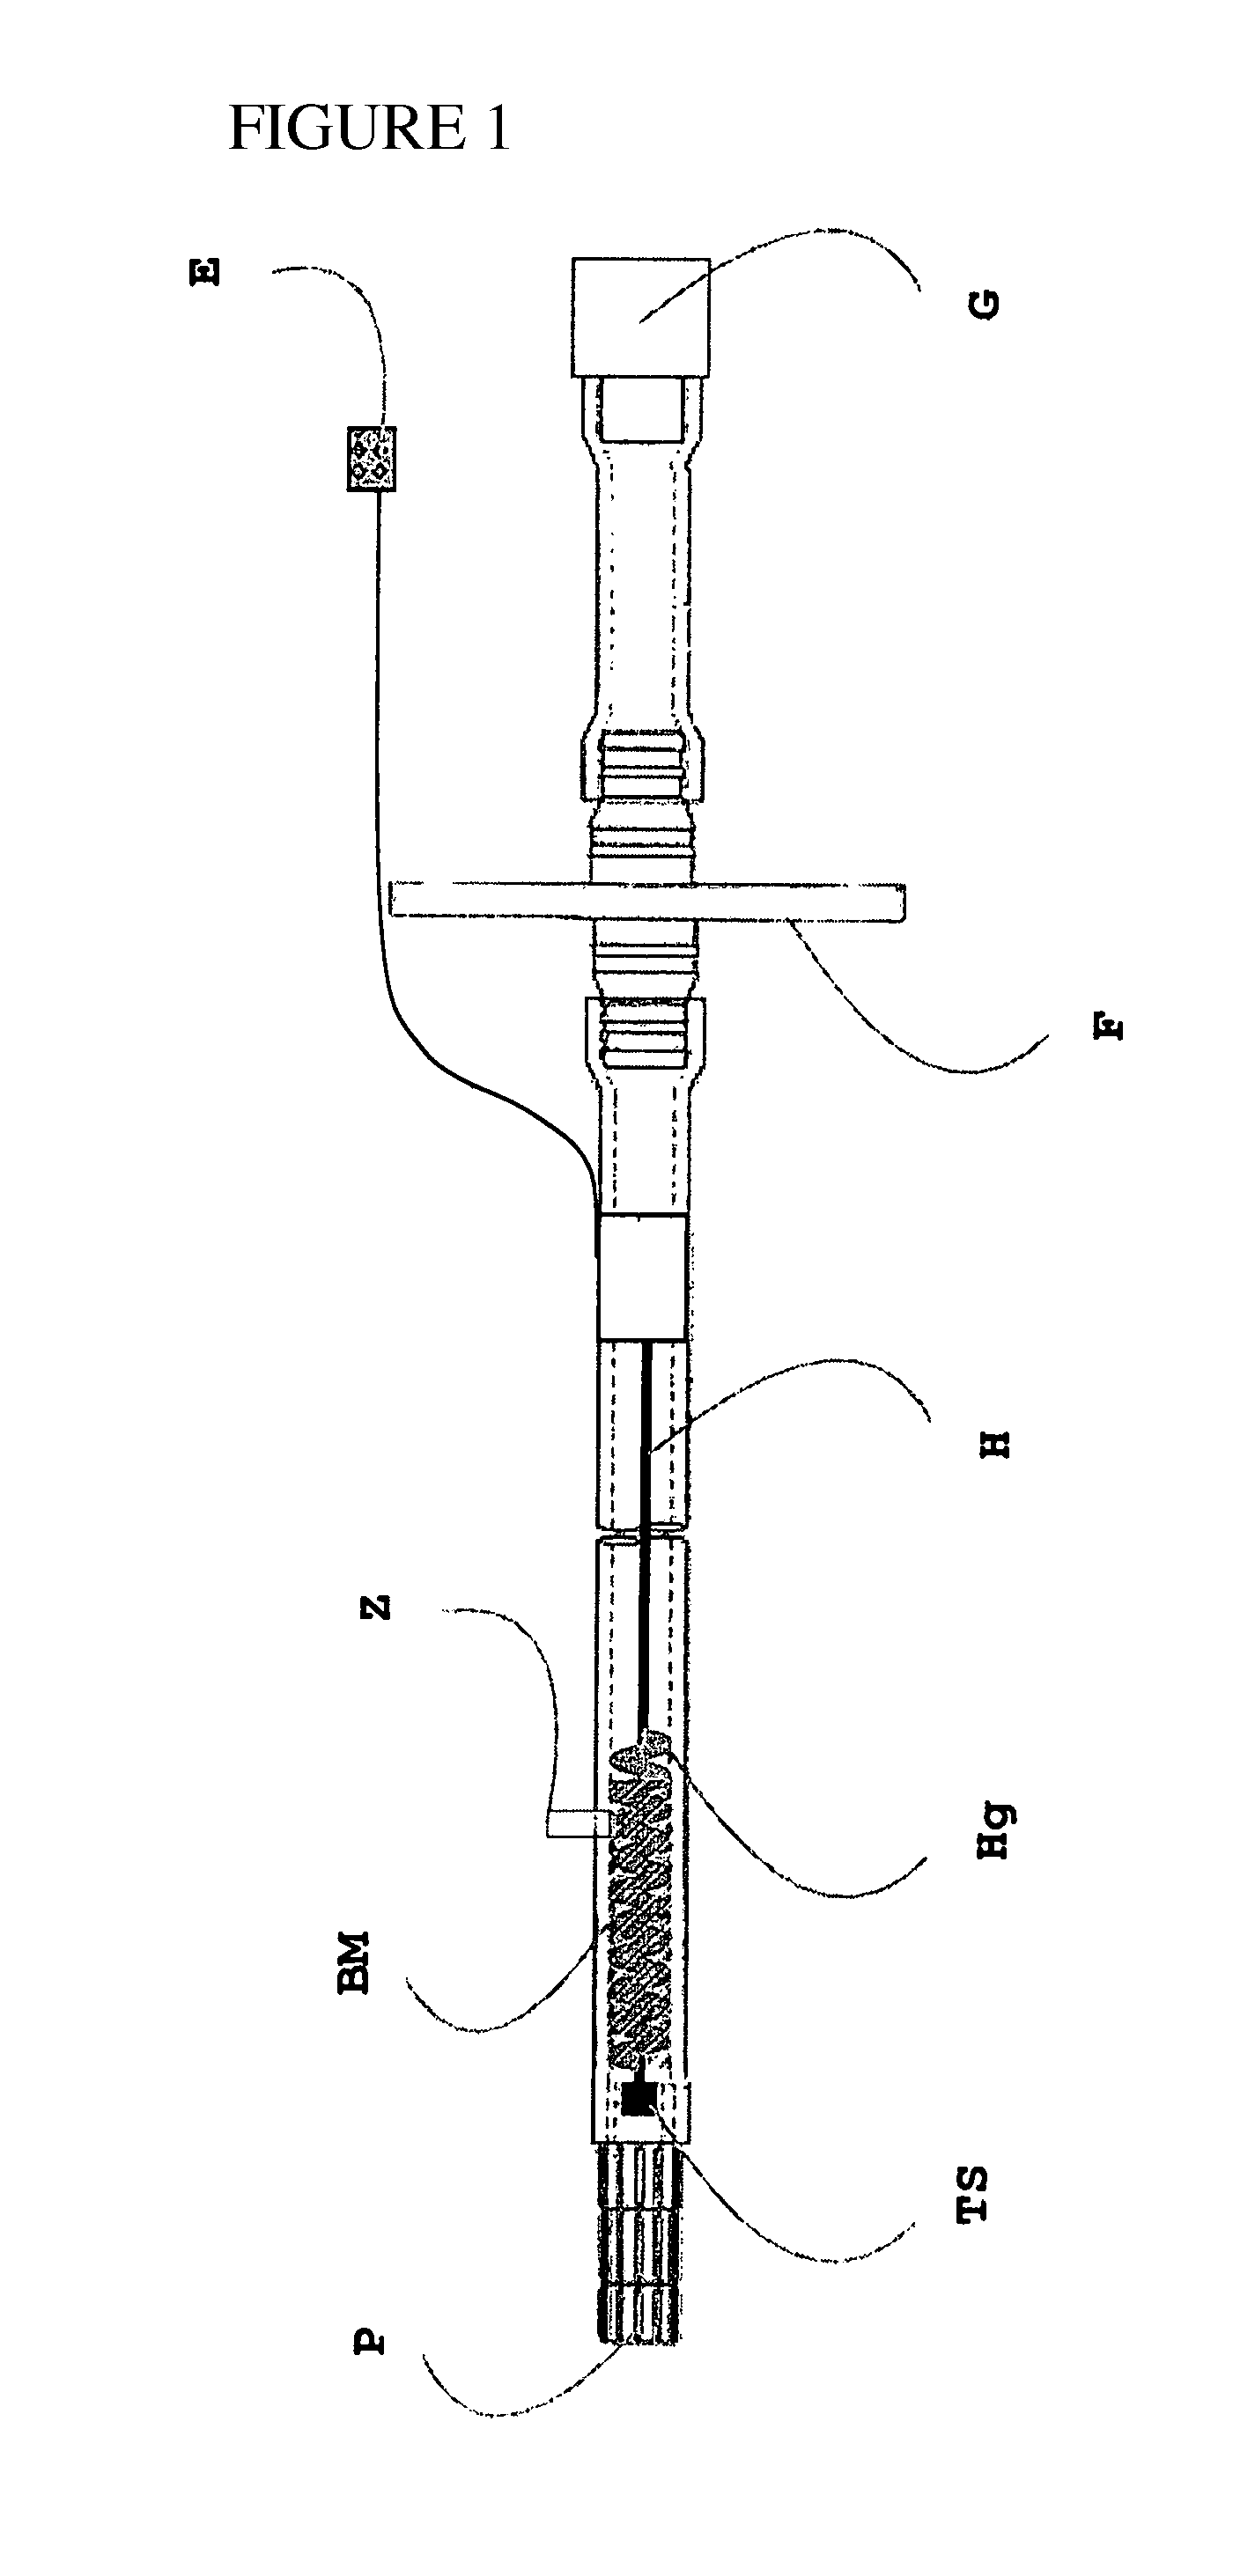 Insufflation tube comprising a humidifying material and a heating element, for laparoscopy